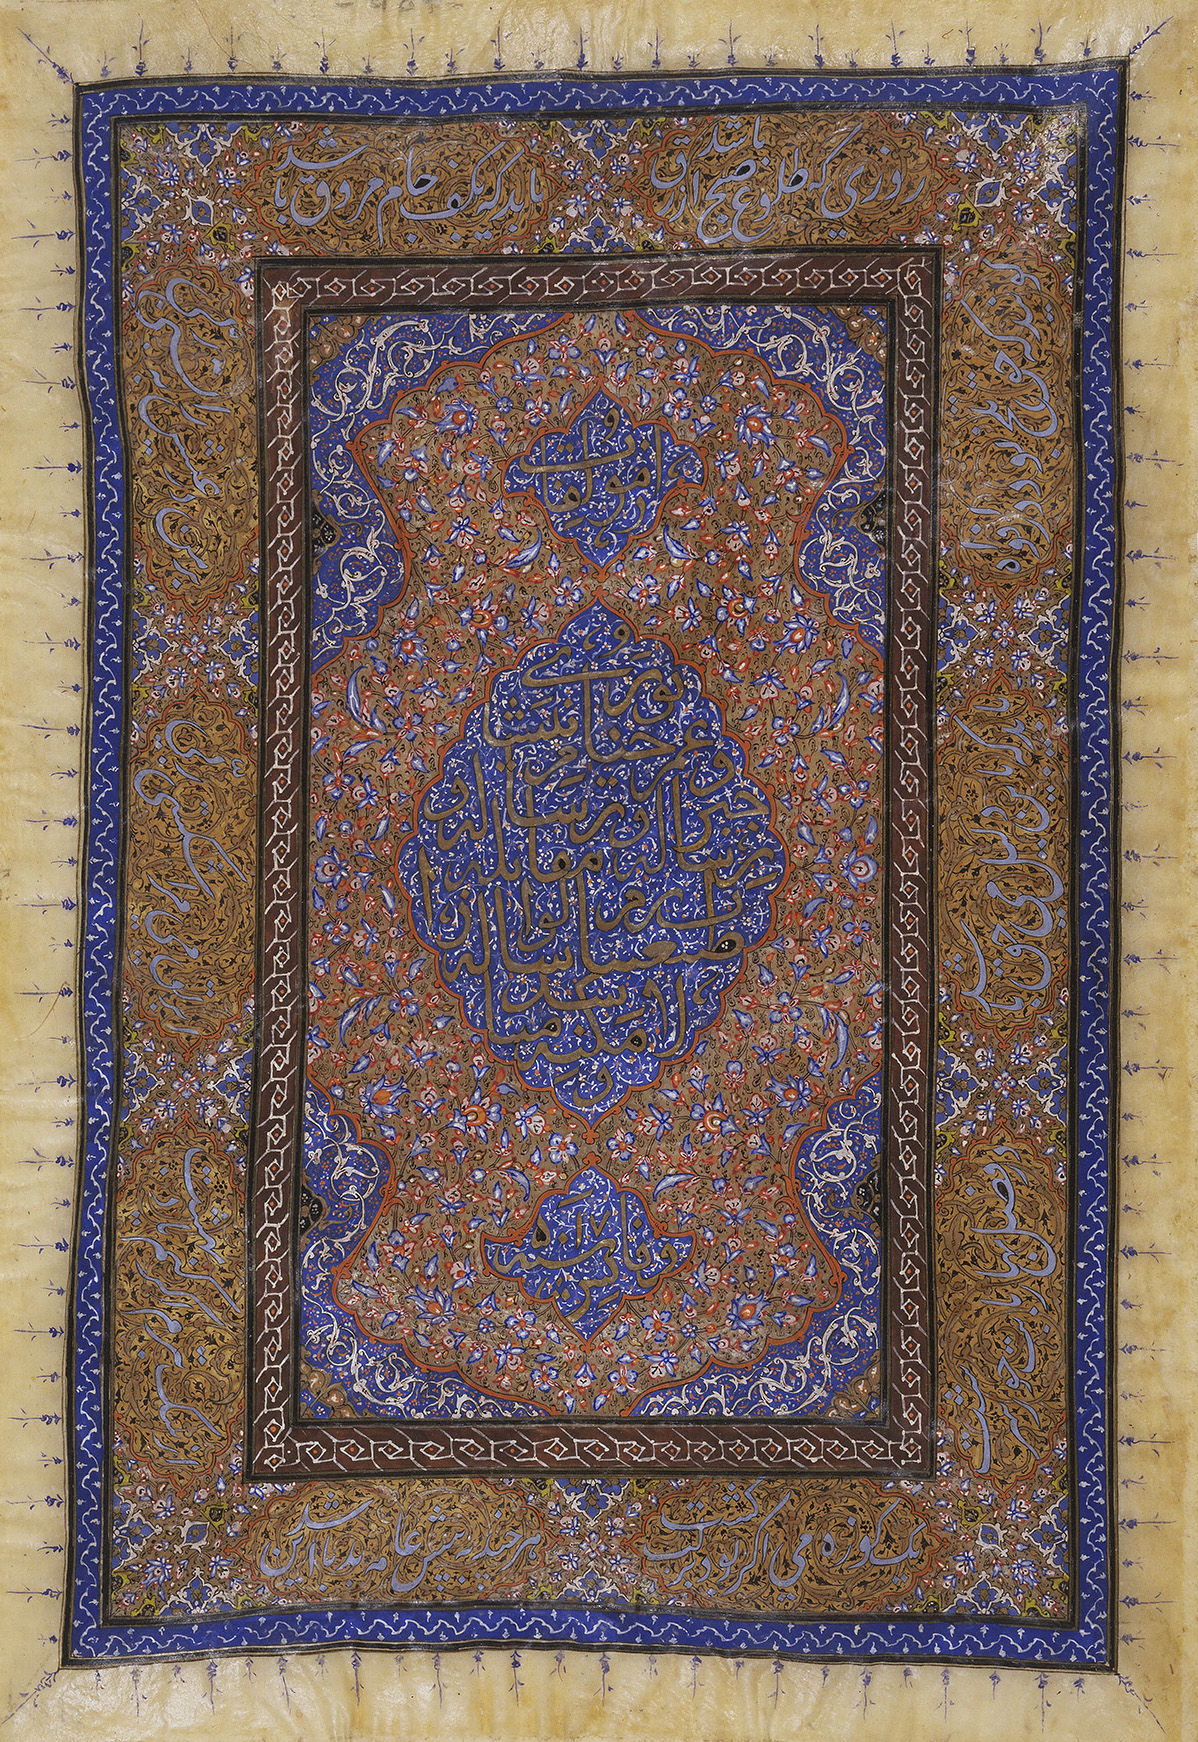 Unknown, 19th century, Persian, Qajar, Illuminated Page with the Poetry of Omar Khayyam